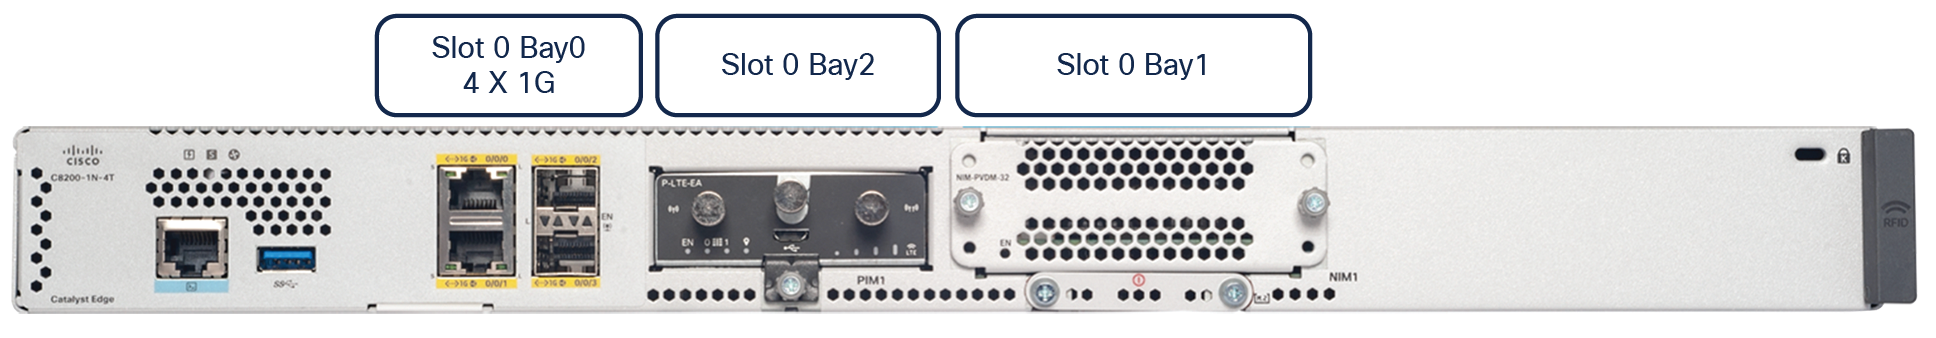 C8200-1N-4T and C8200L-1N-4T connectivity options